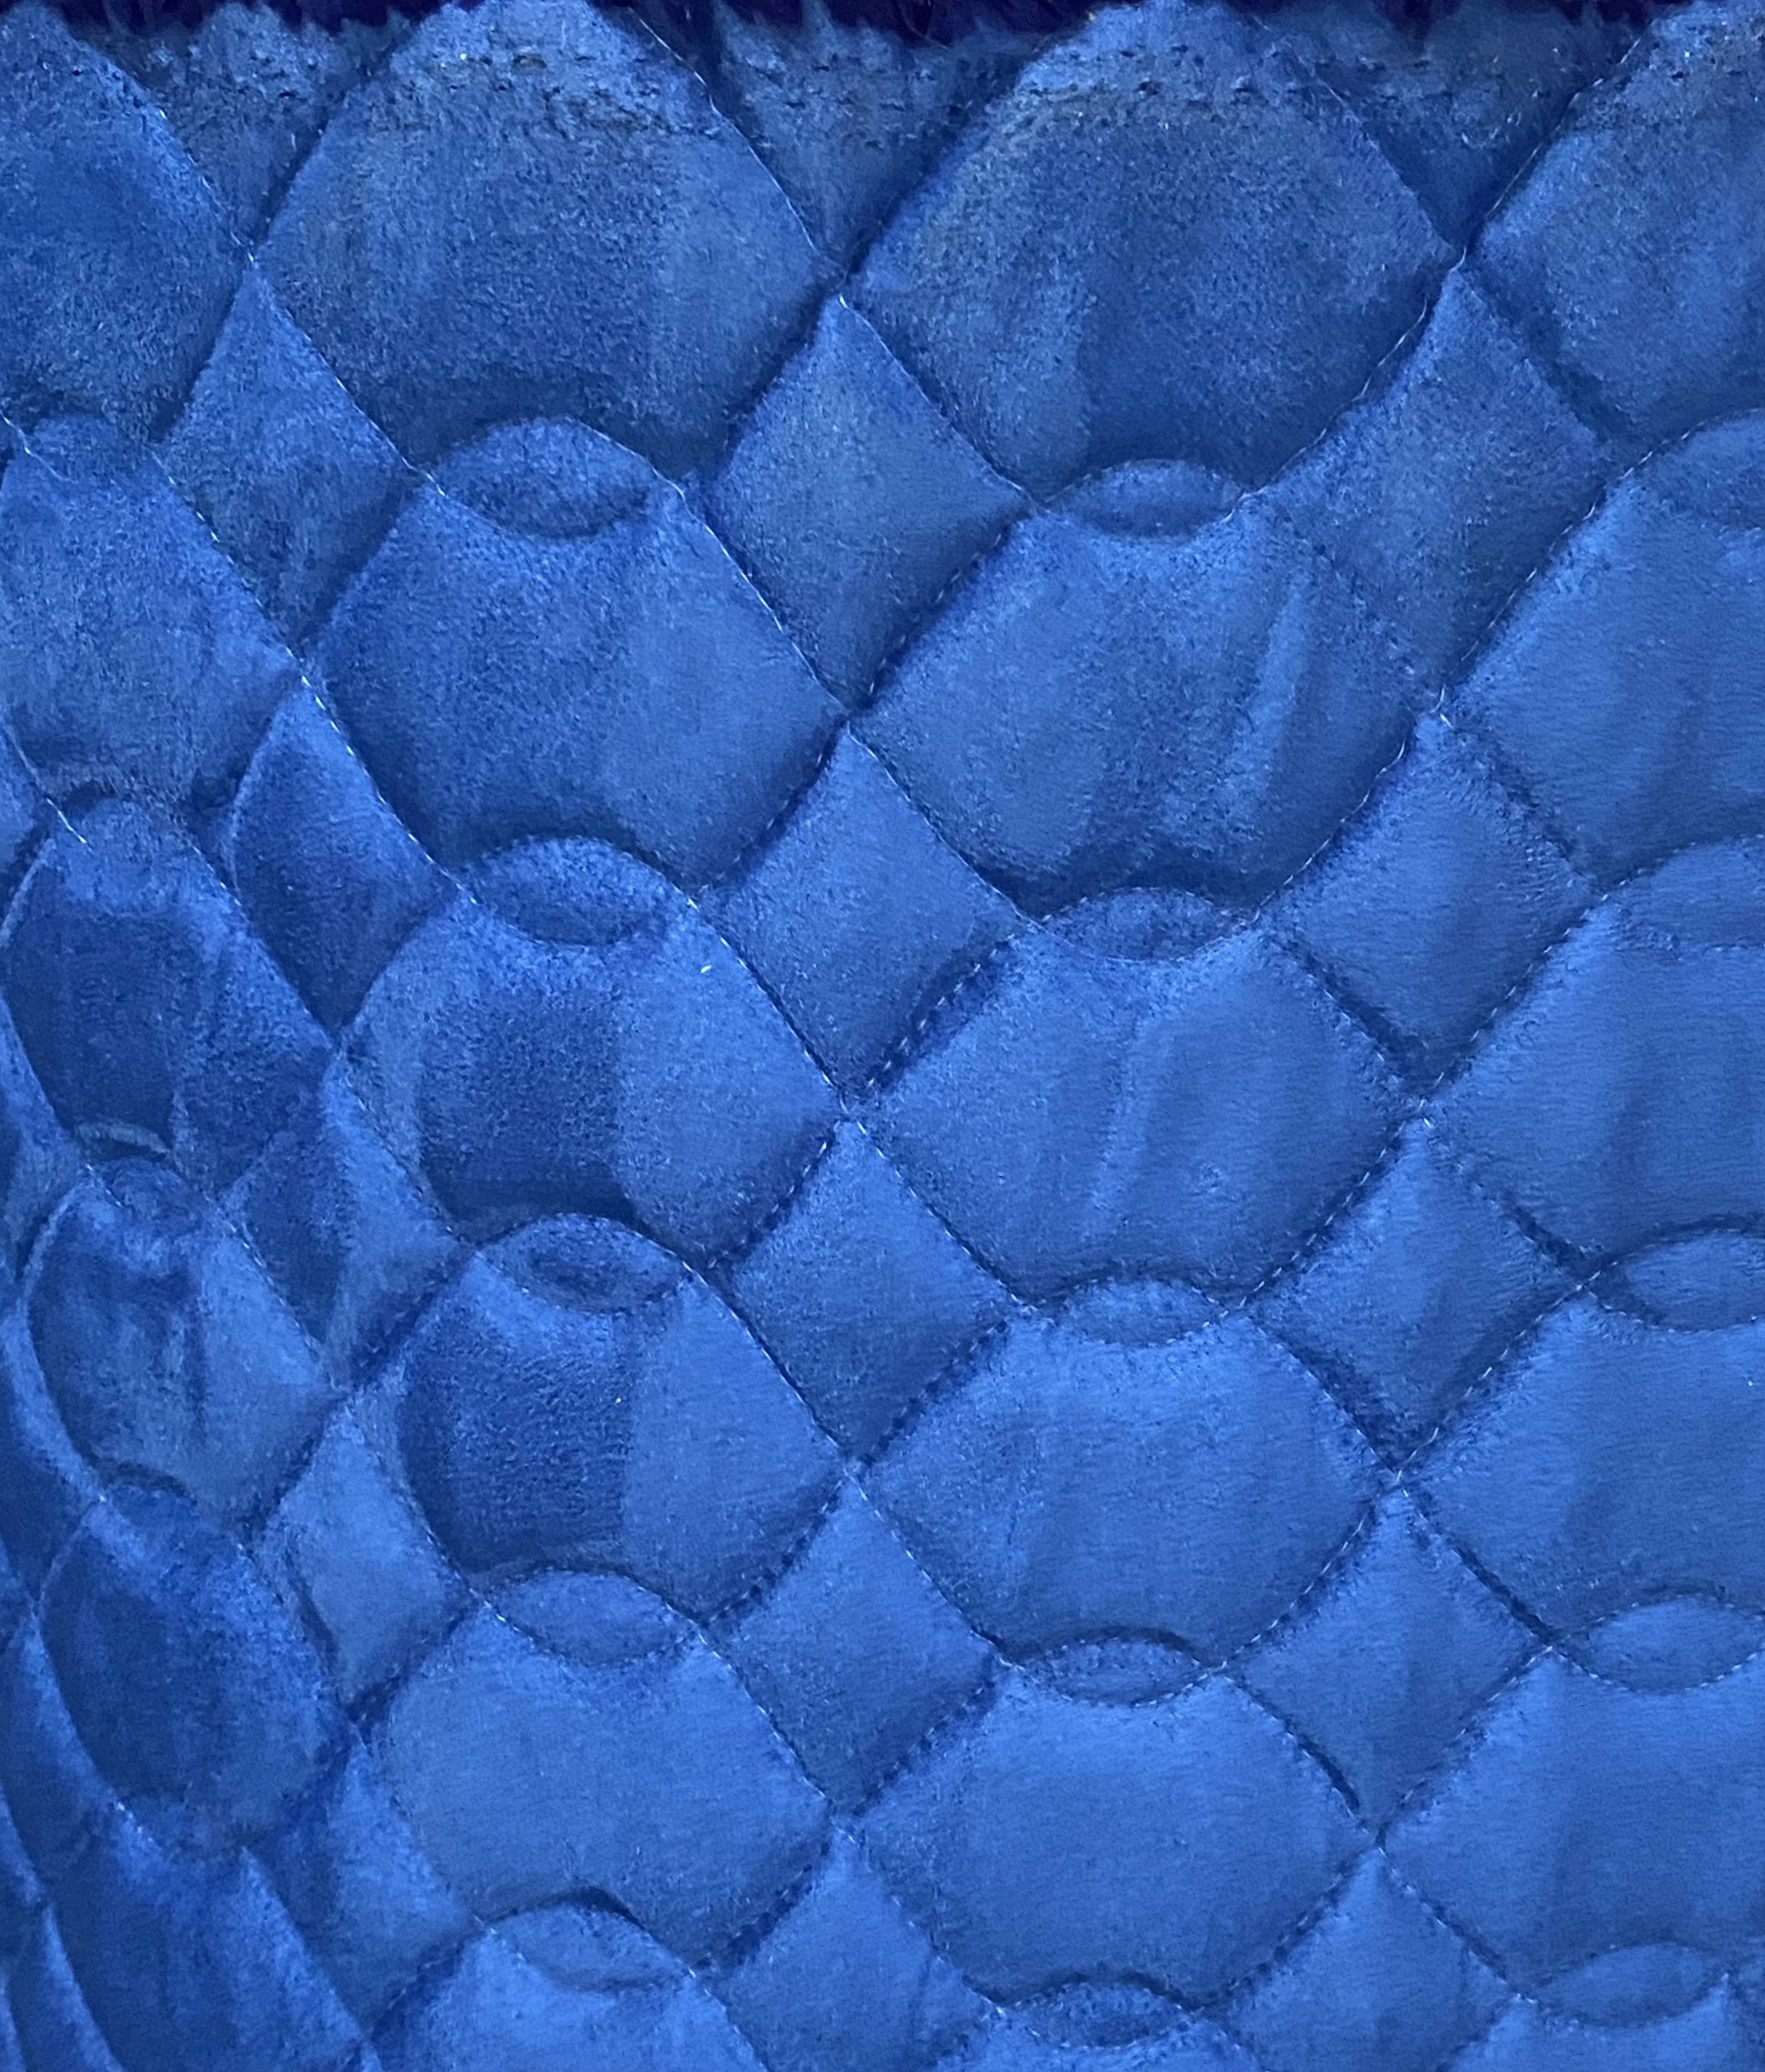 royal-blue-diamond-quilted-faux-suede-3-8-foam-backing-58-wide-upholstery-fabric-by-the-yard